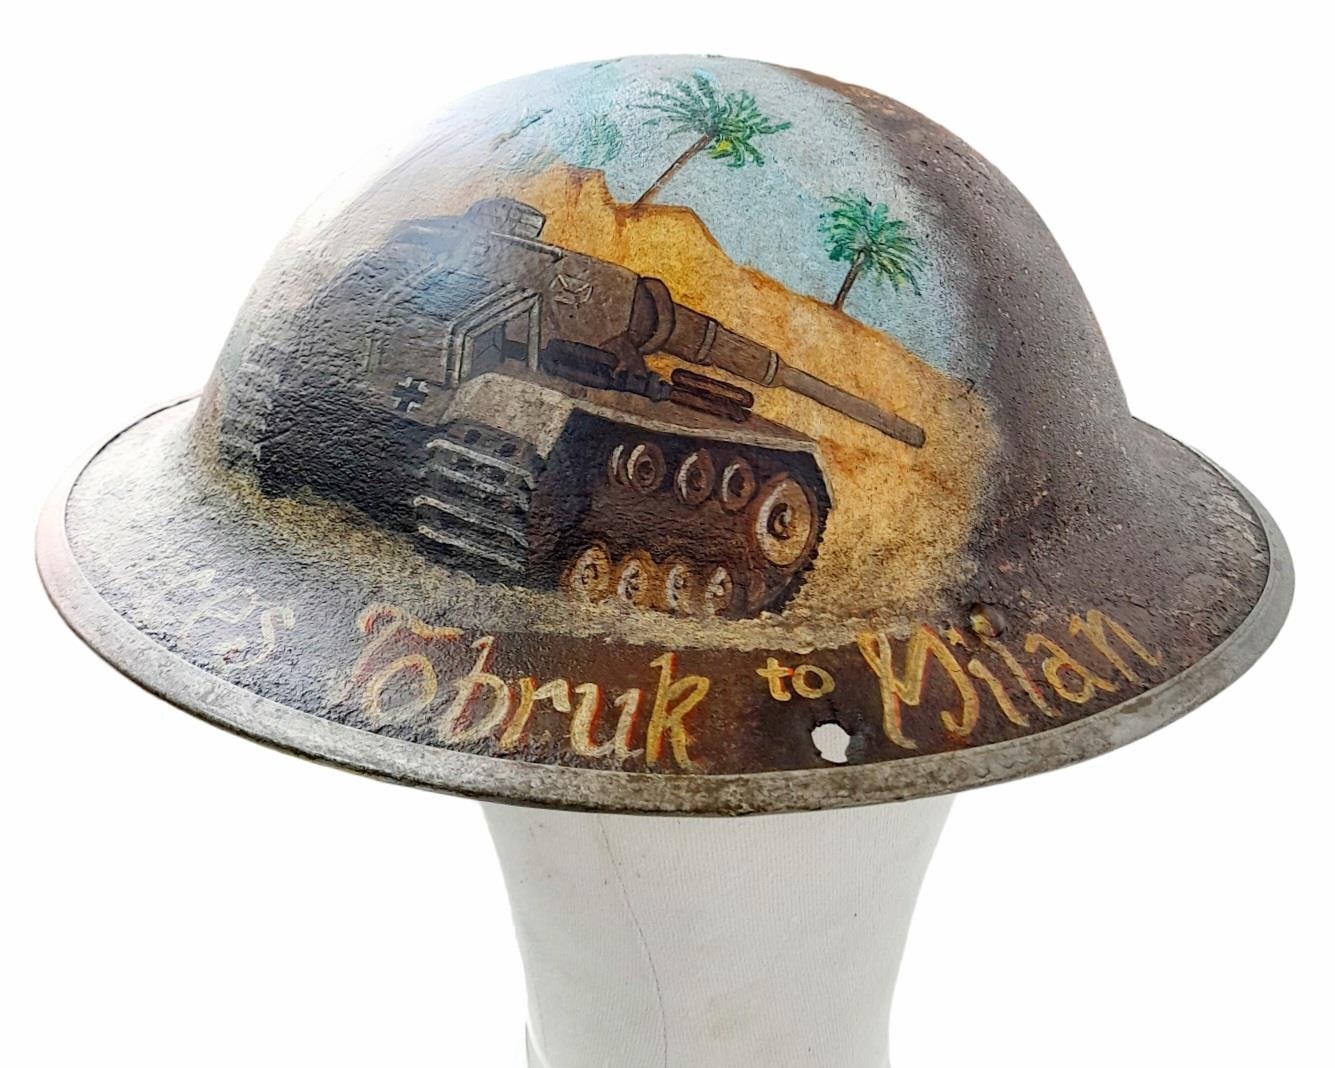 WW2 Trench Art South African Mk II Helmet “From Tobruk to Milan” - Image 2 of 5